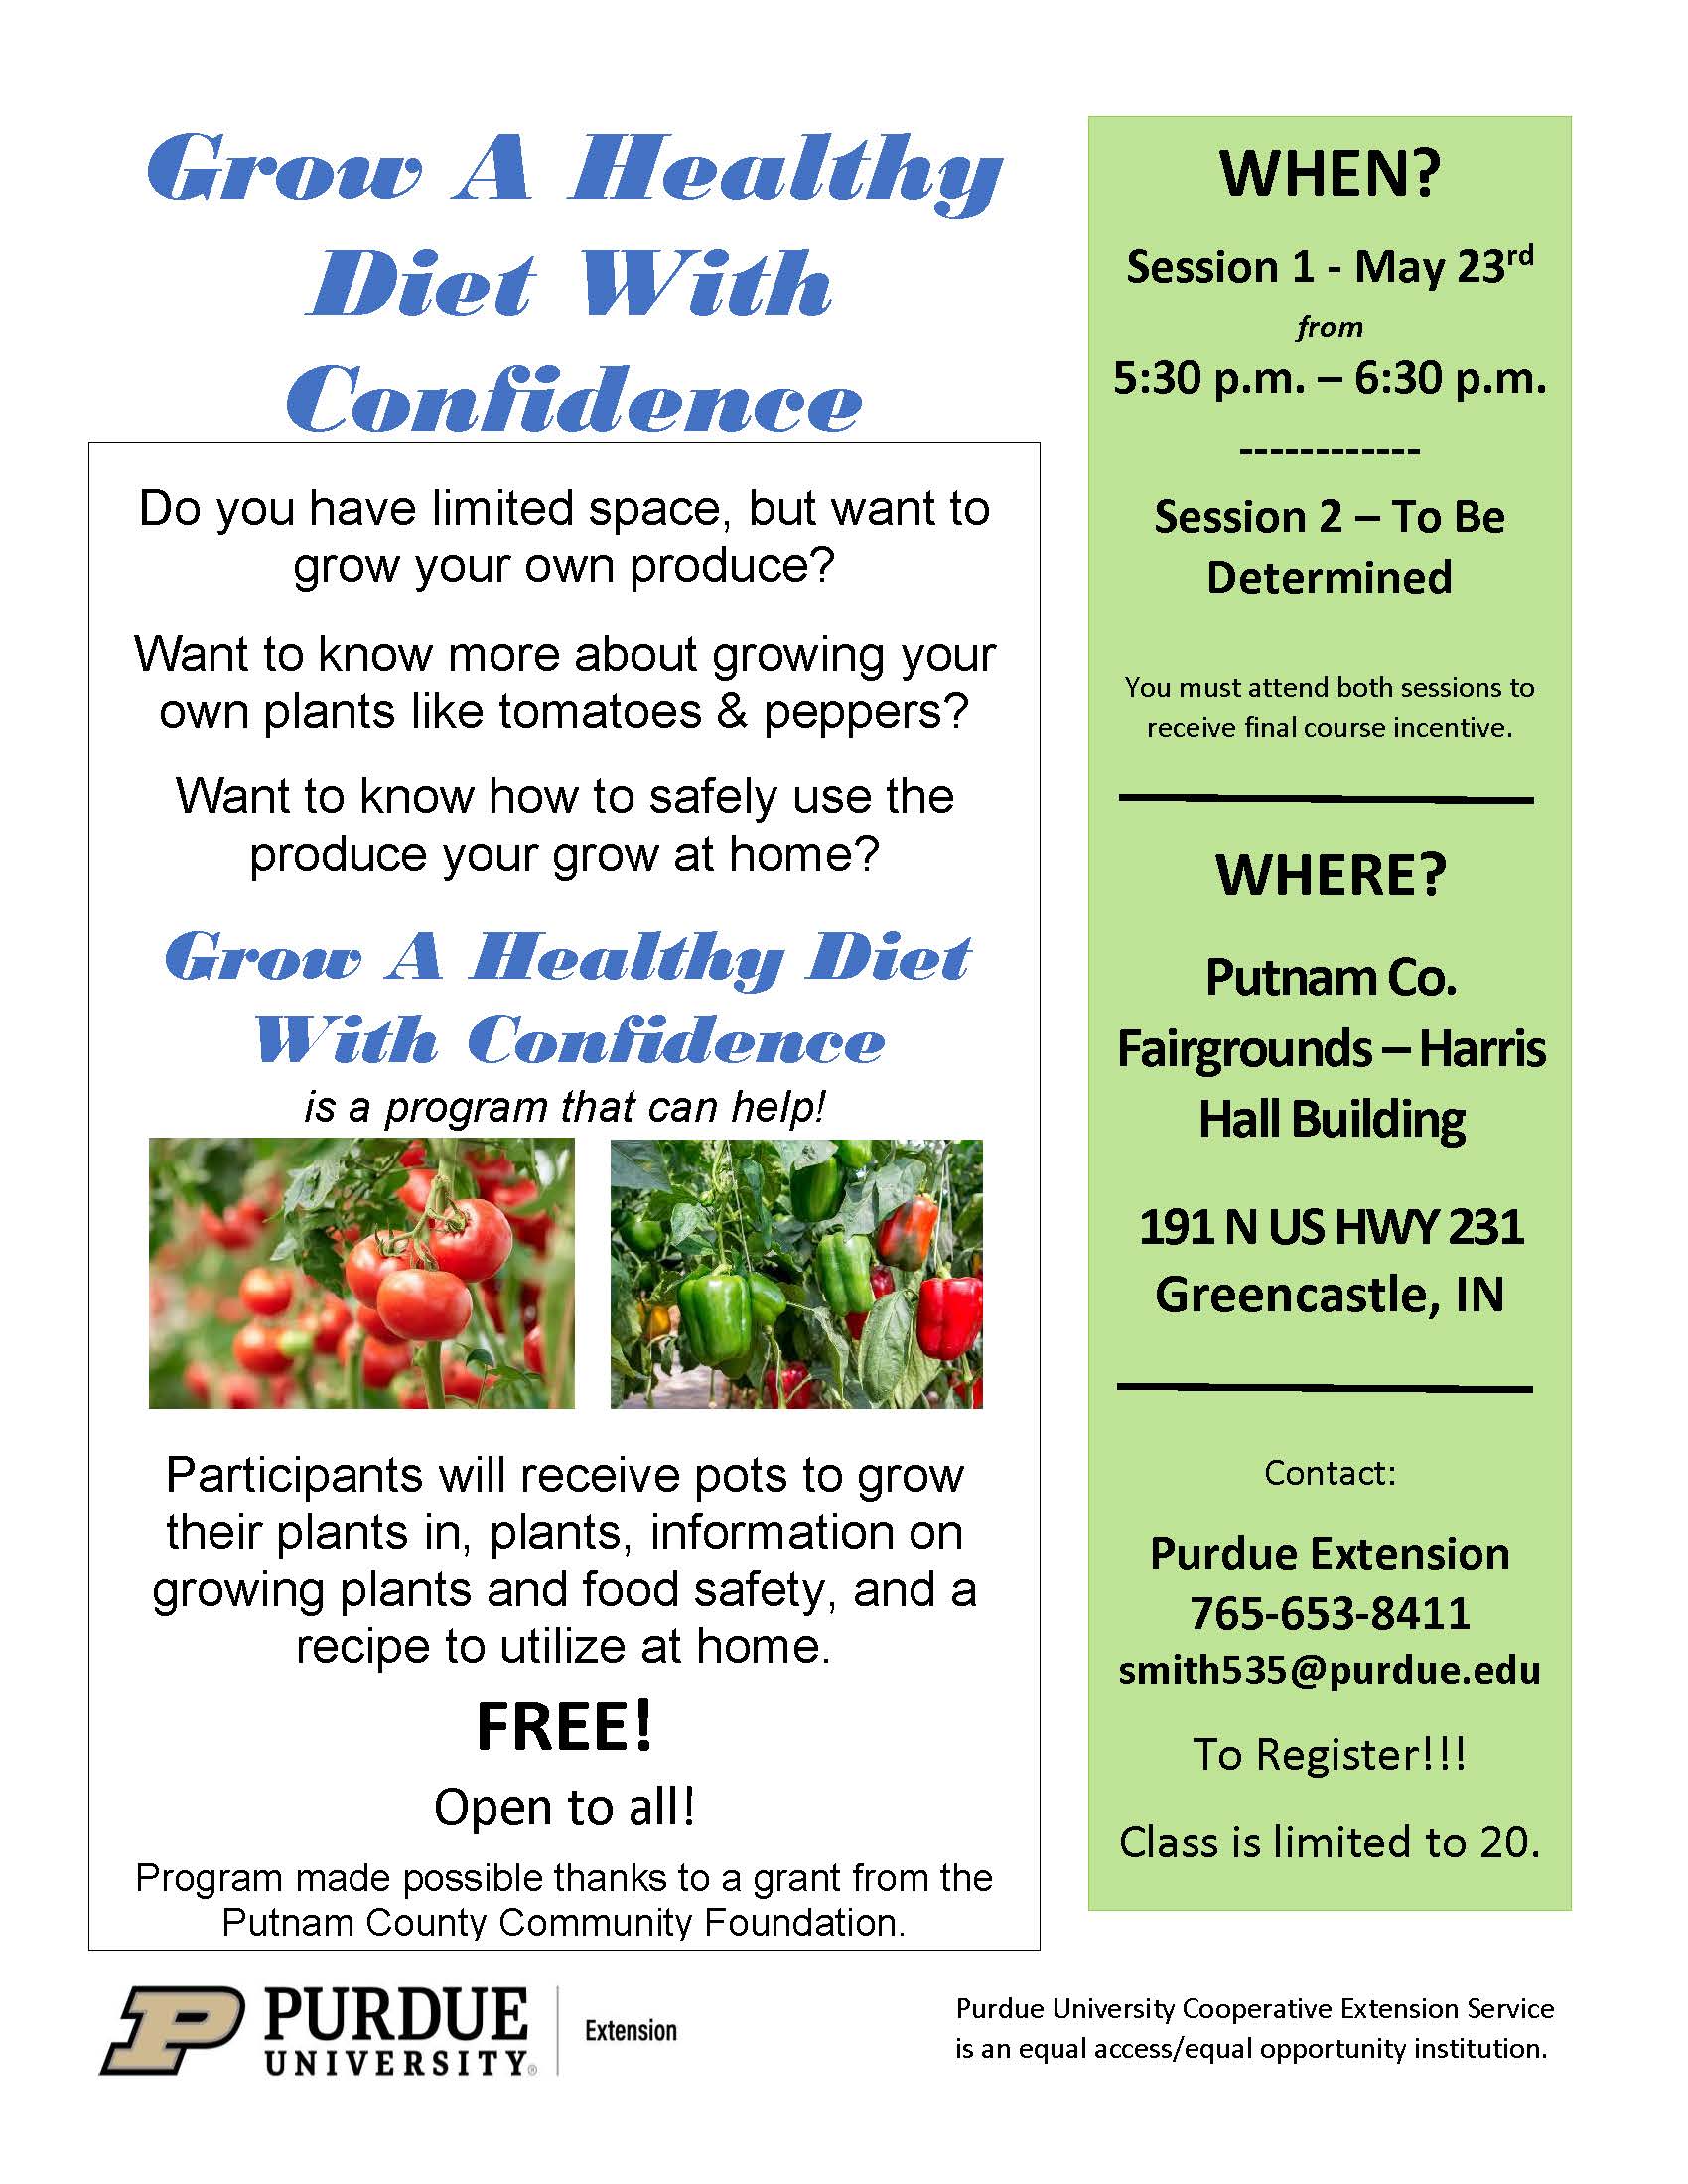 Flyer for the grow a healthy diet with confidence program with images of tomatoes and peppers.